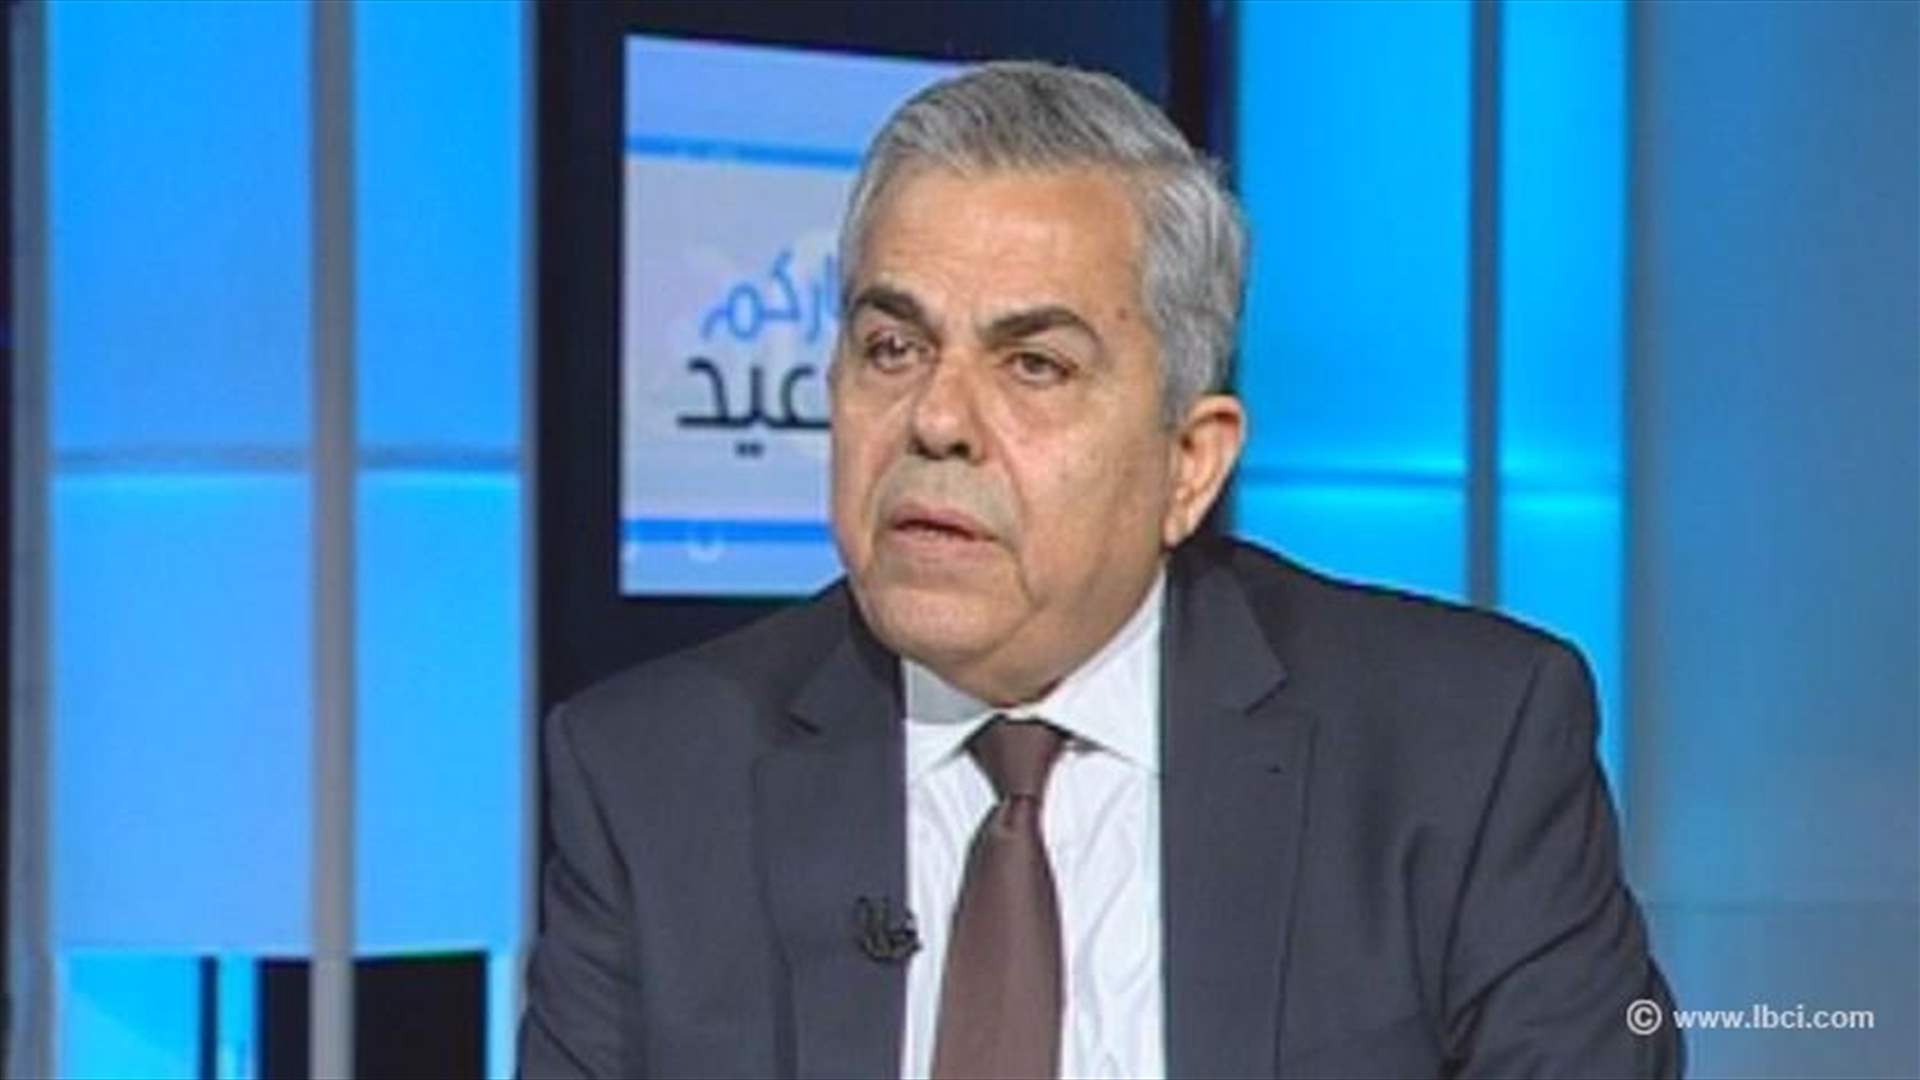 Dib to LBCI: We are serious about the debate and approval of electoral law